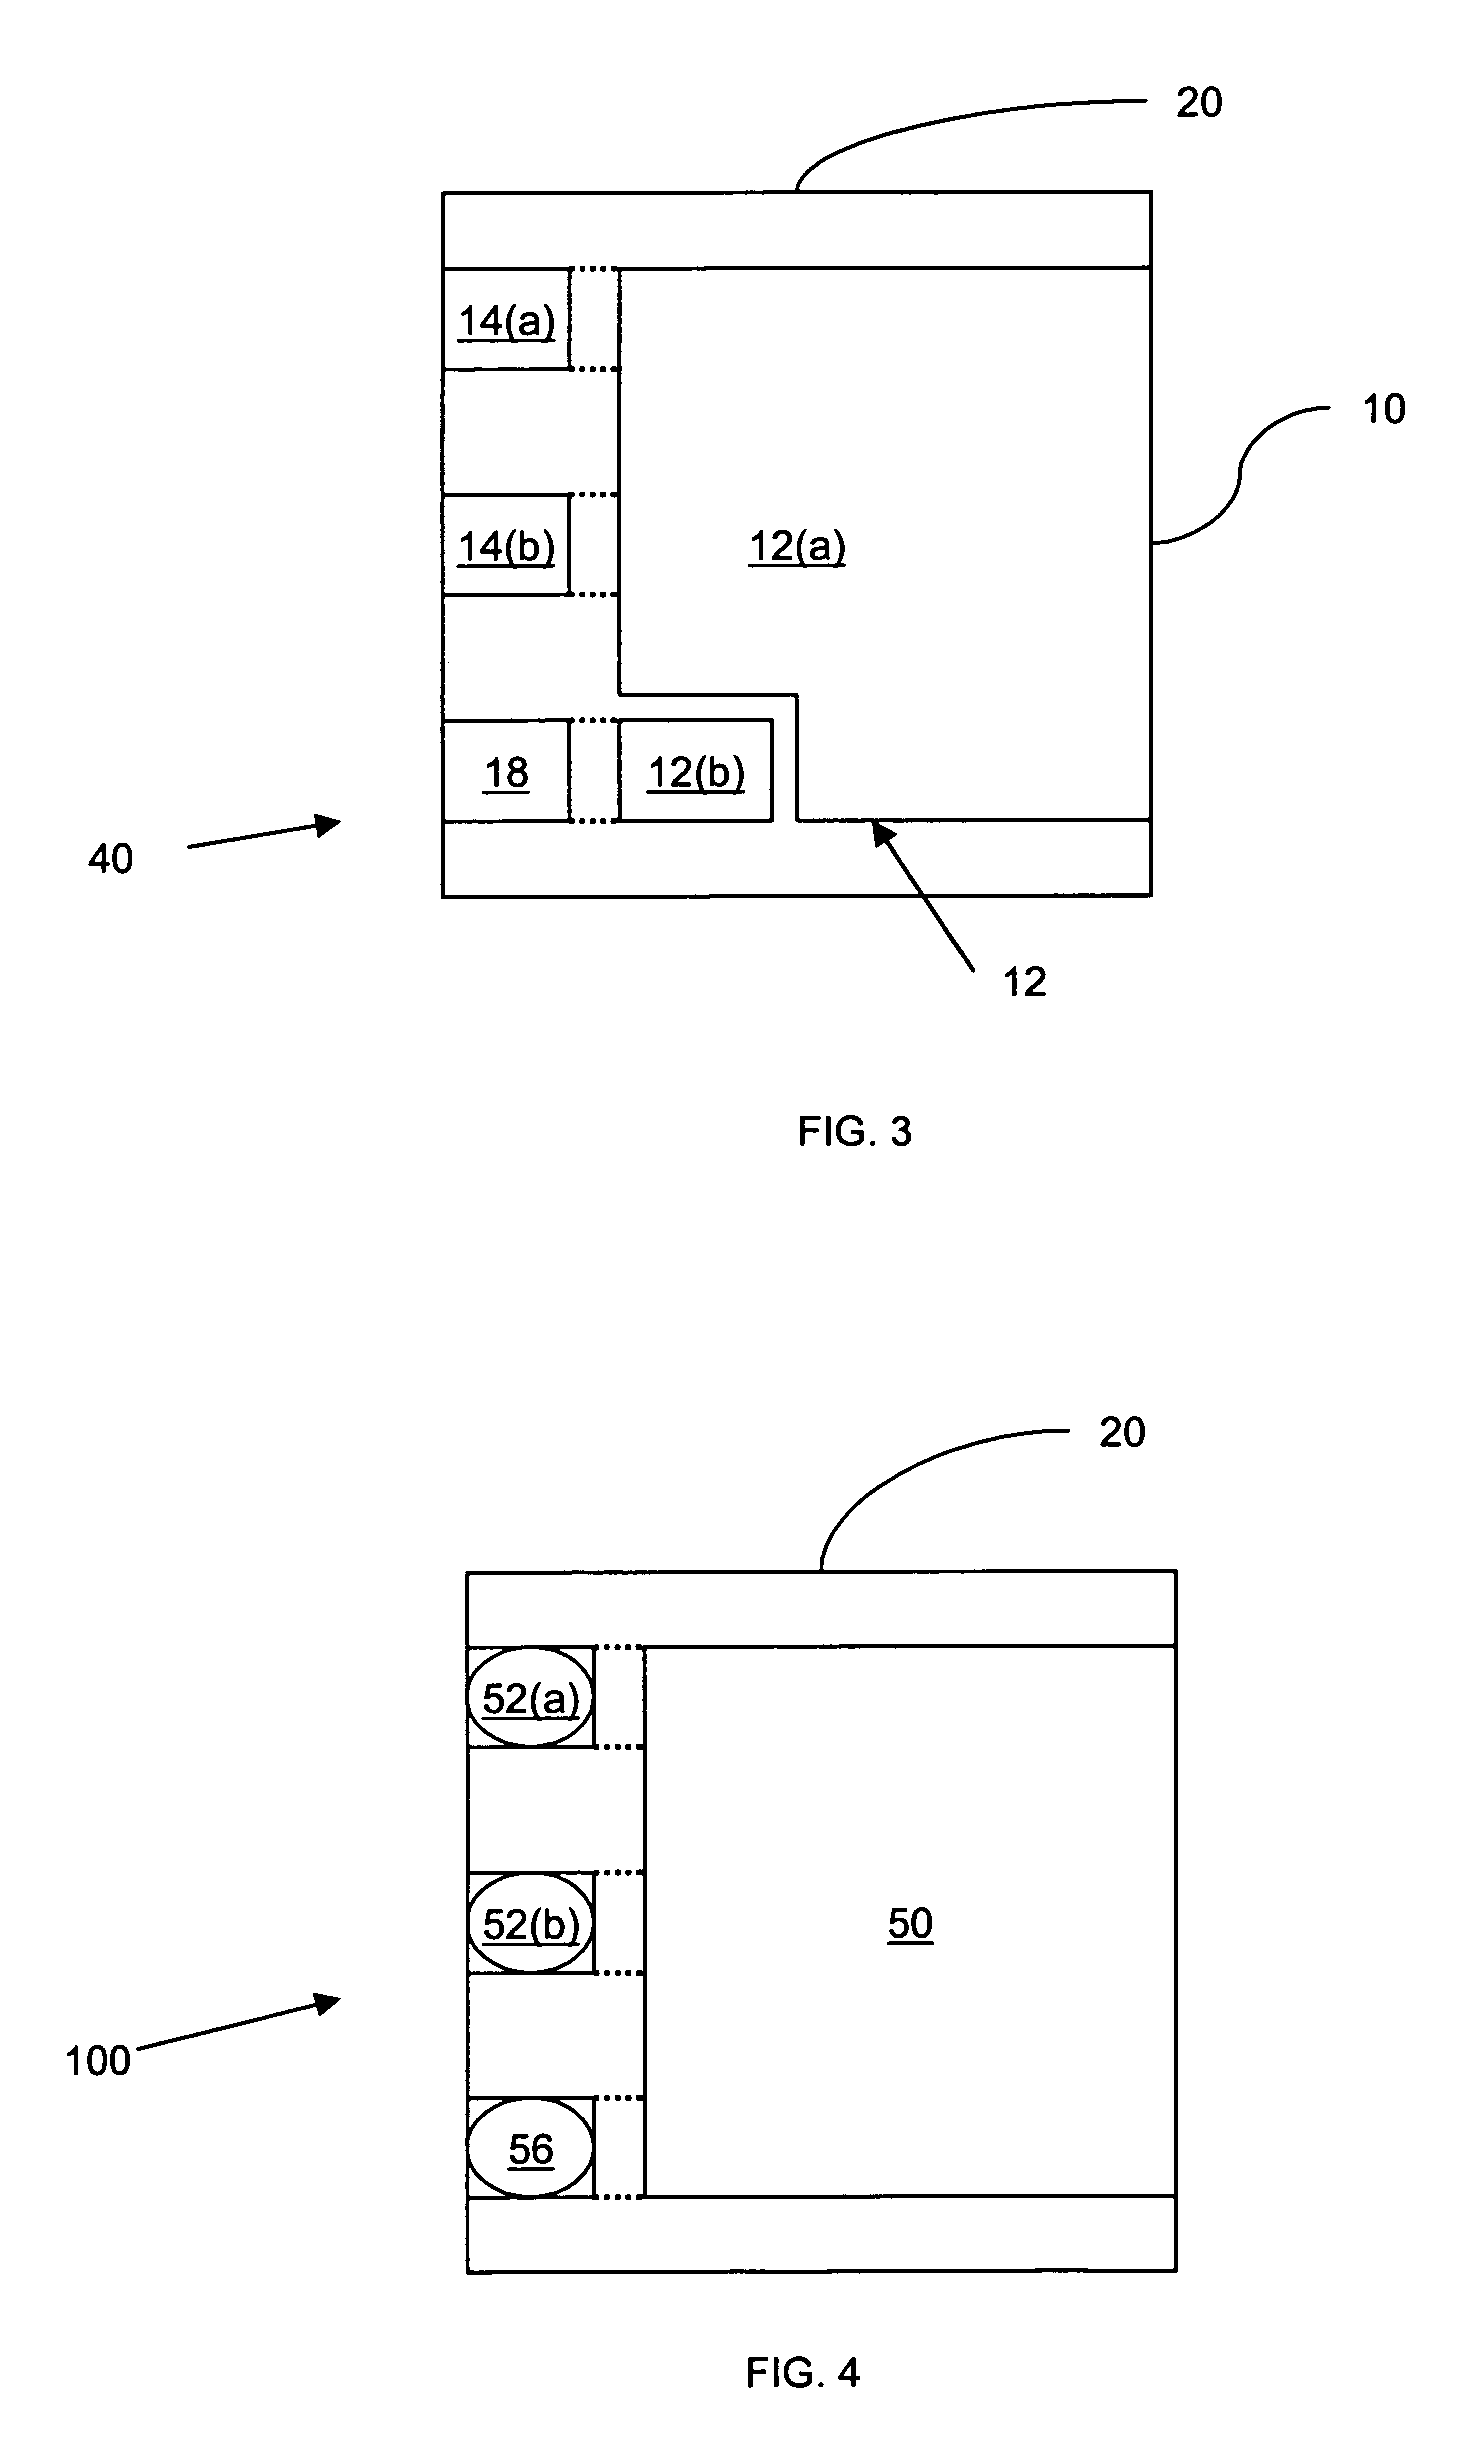 Substrate based unmolded package including lead frame structure and semiconductor die